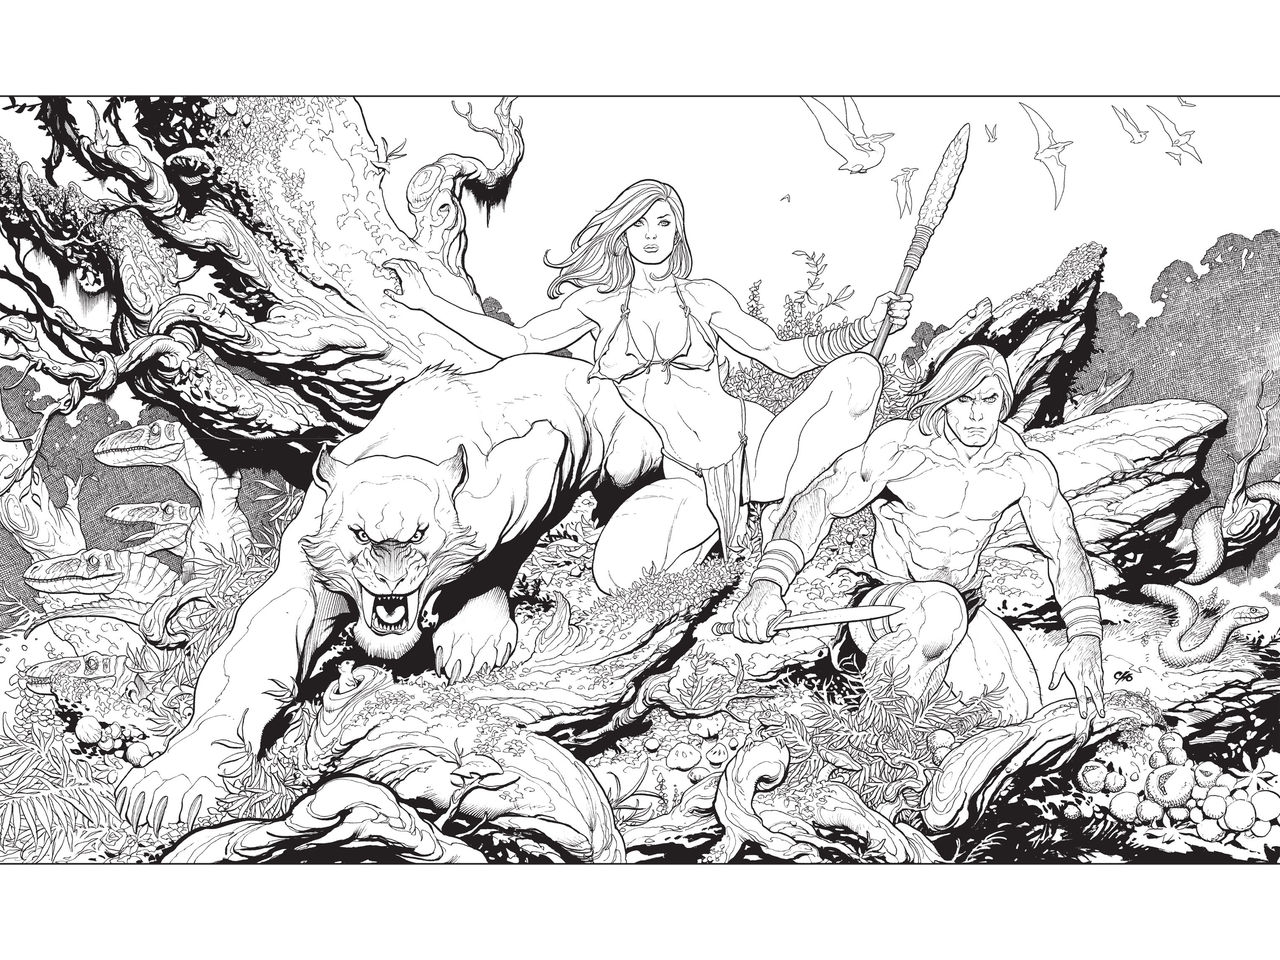 [Frank Cho] Apes & Babes: The Art Of Frank Cho 93